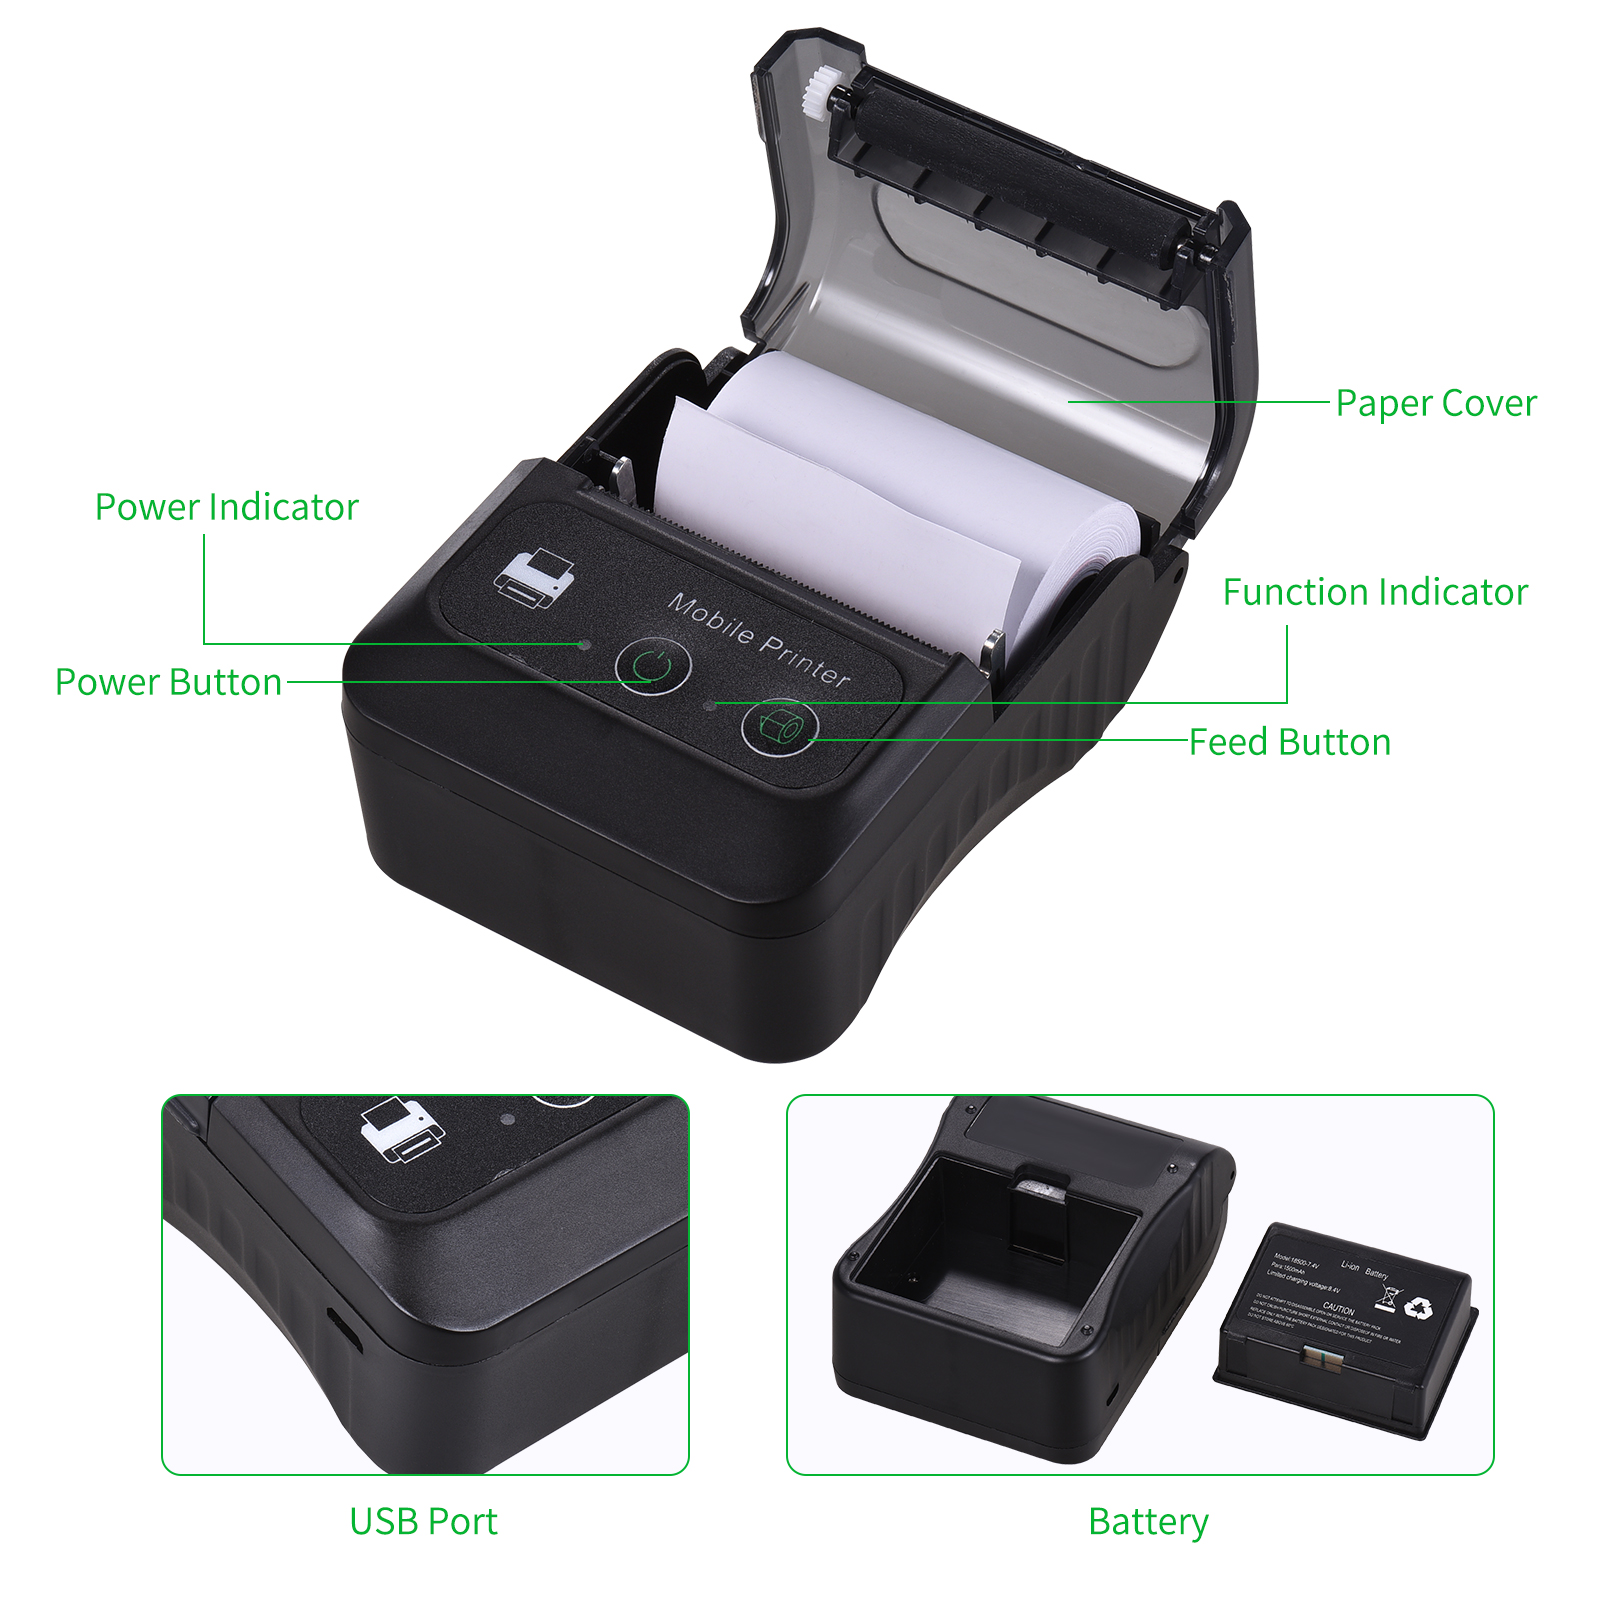 Portable Phone Thermal Receipt Printer 58mm Mini Size To Carry On Works With Android & iOS Handheld Wireless Bluetooth Printer